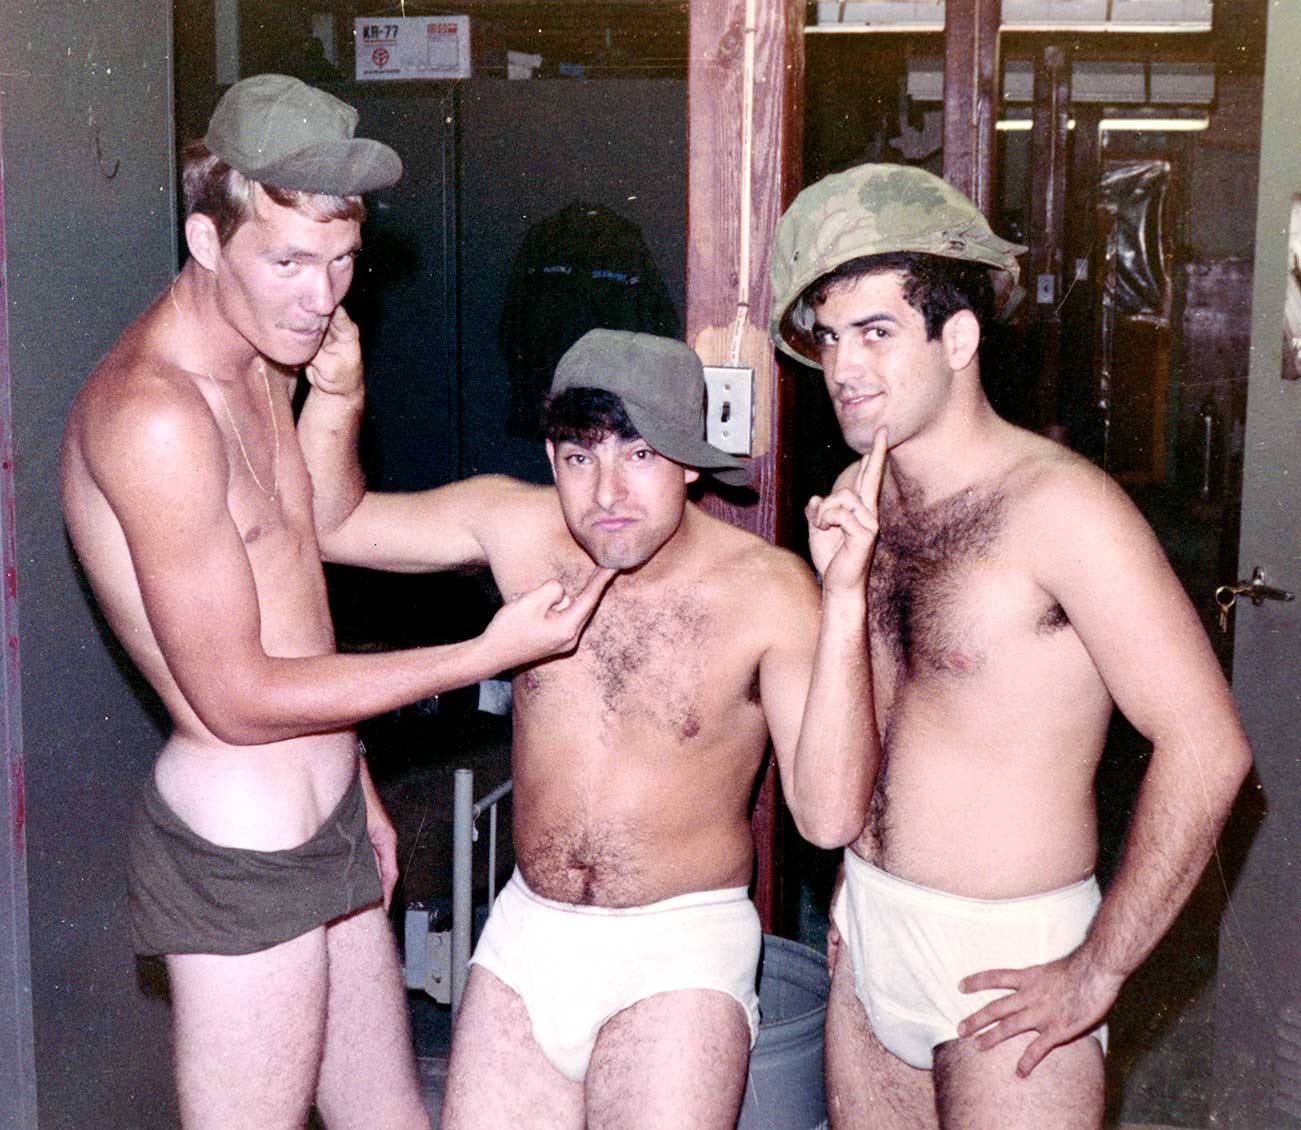 owner/founder Norman Dee in the center, posing with fellow servicemen